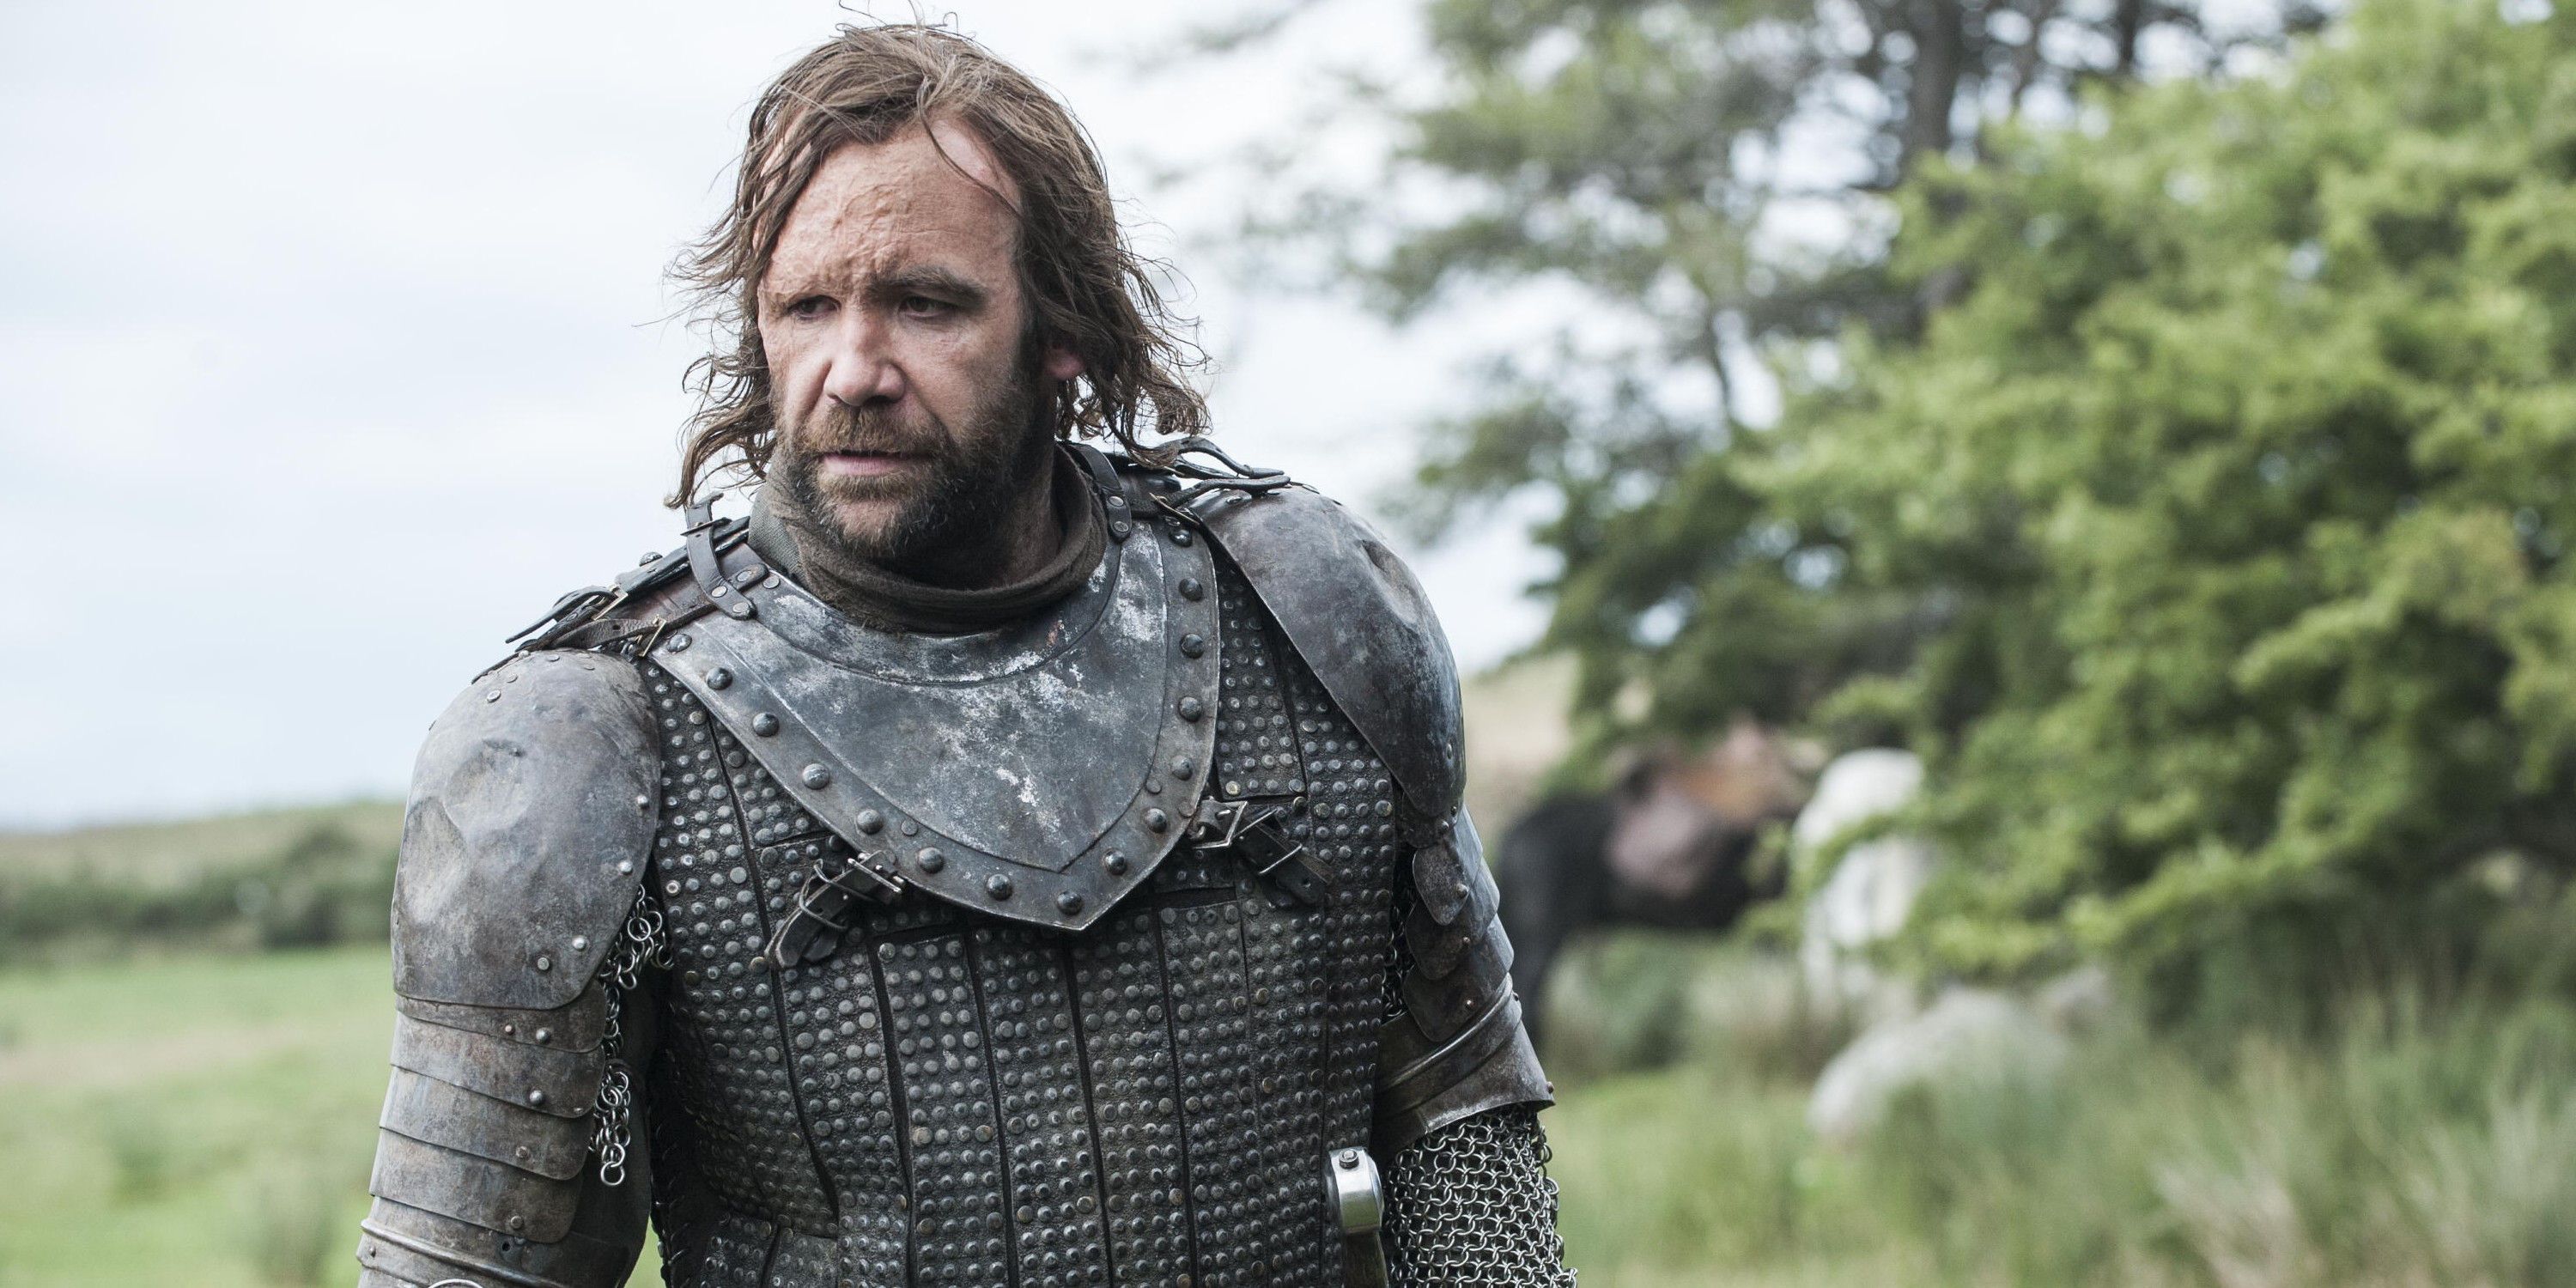 The Hound in Game of Thrones